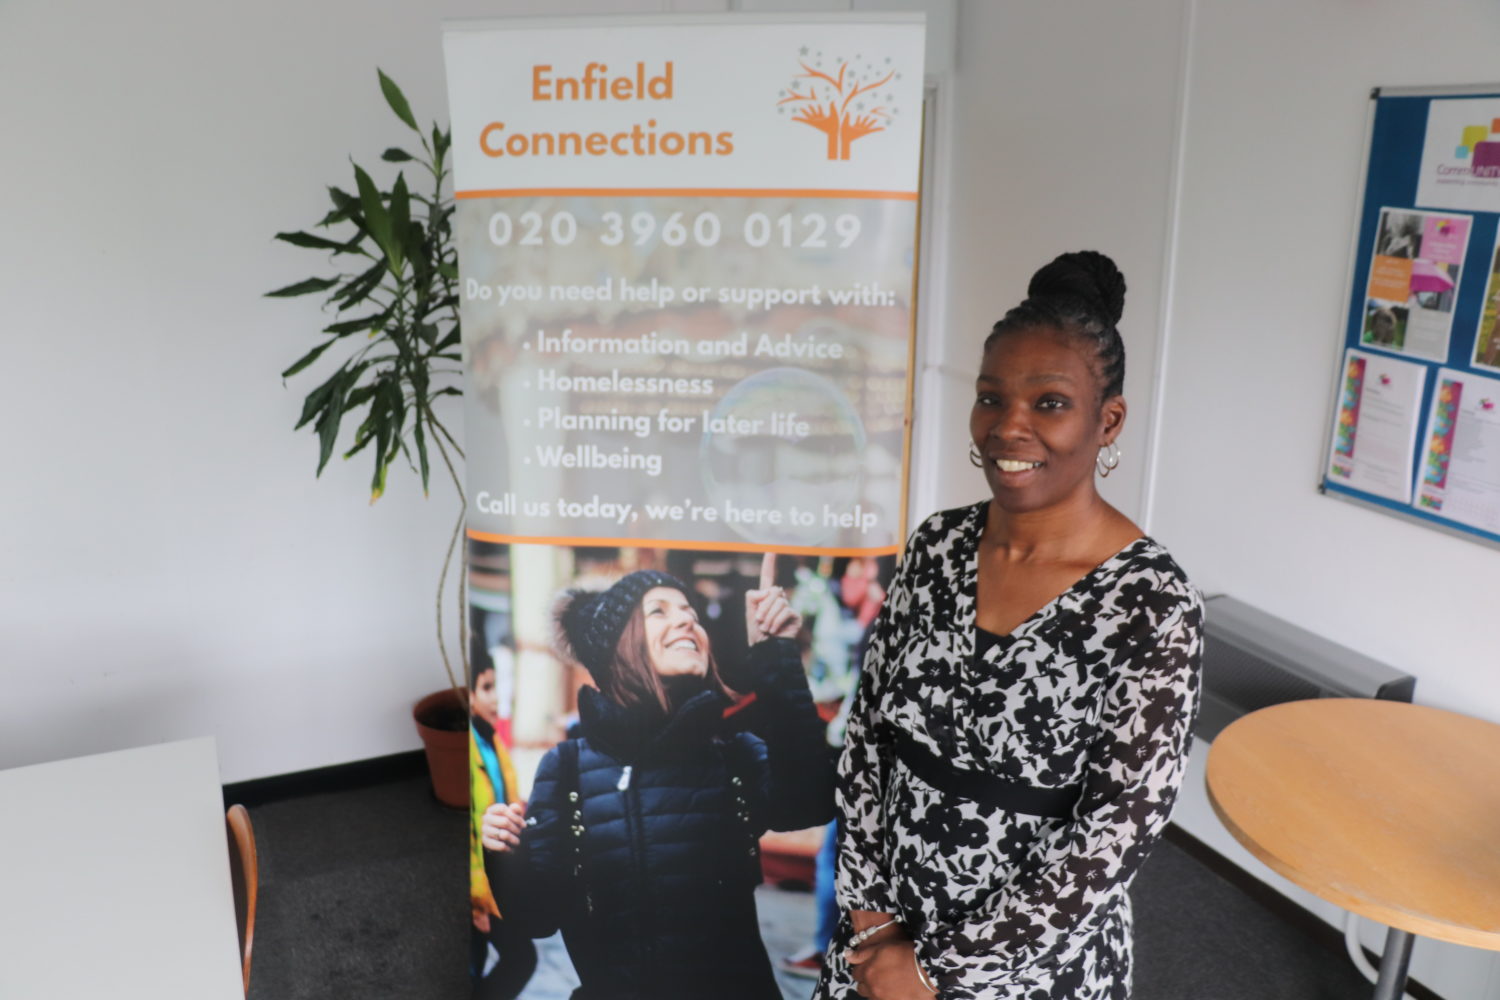 Angela Greaves is the new programme manager at Enfield Connections